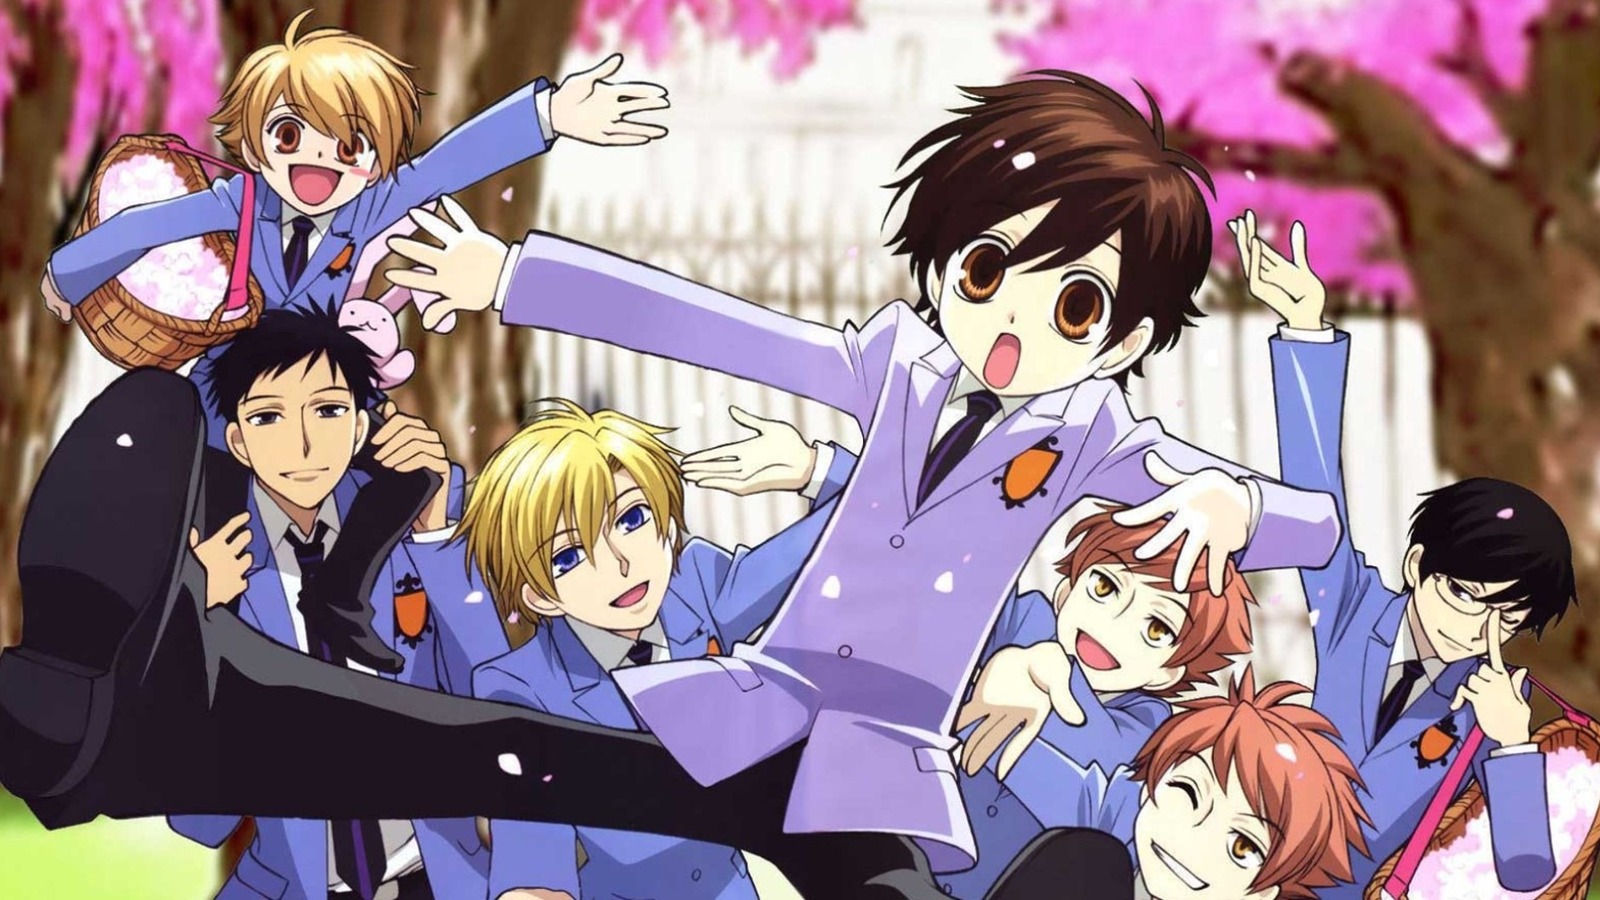 Ouran High School Host Club Was Born From A Simple One-Sentence Pitch